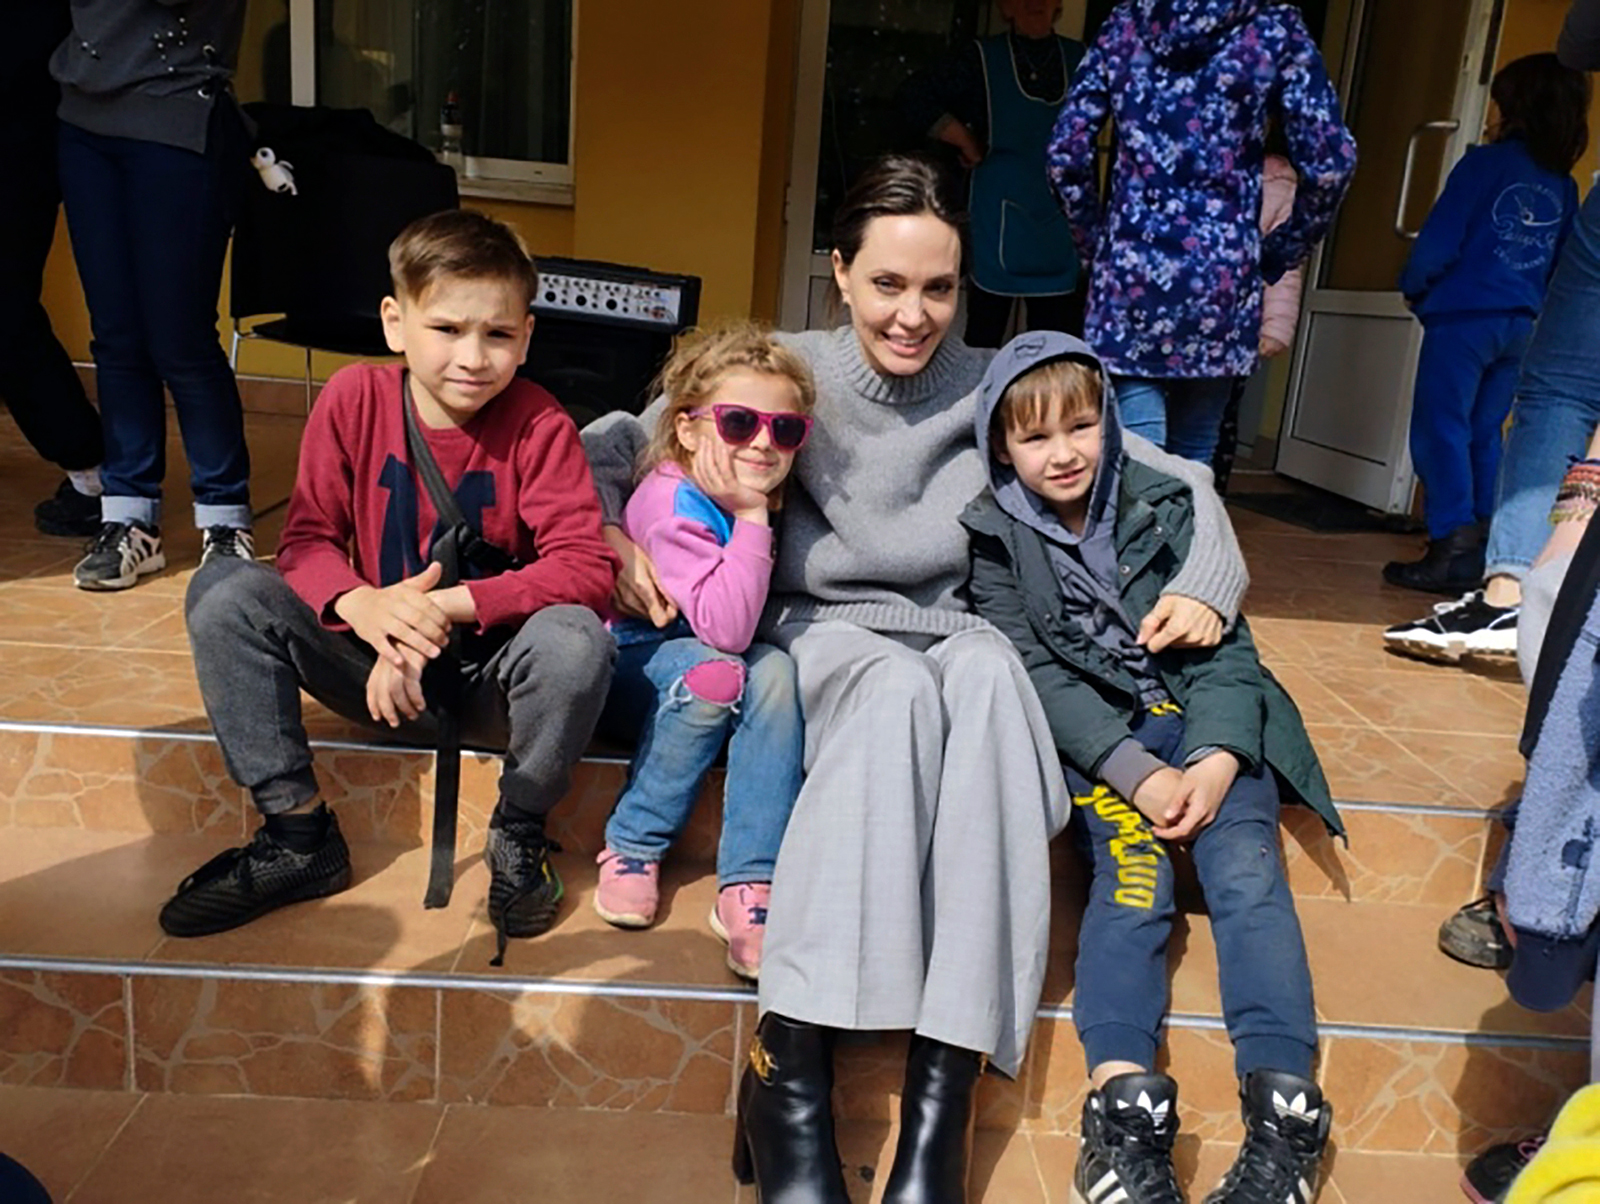 Angelina Jolie poses for photo with kids in Lviv, Ukraine, on Saturday, April 30.